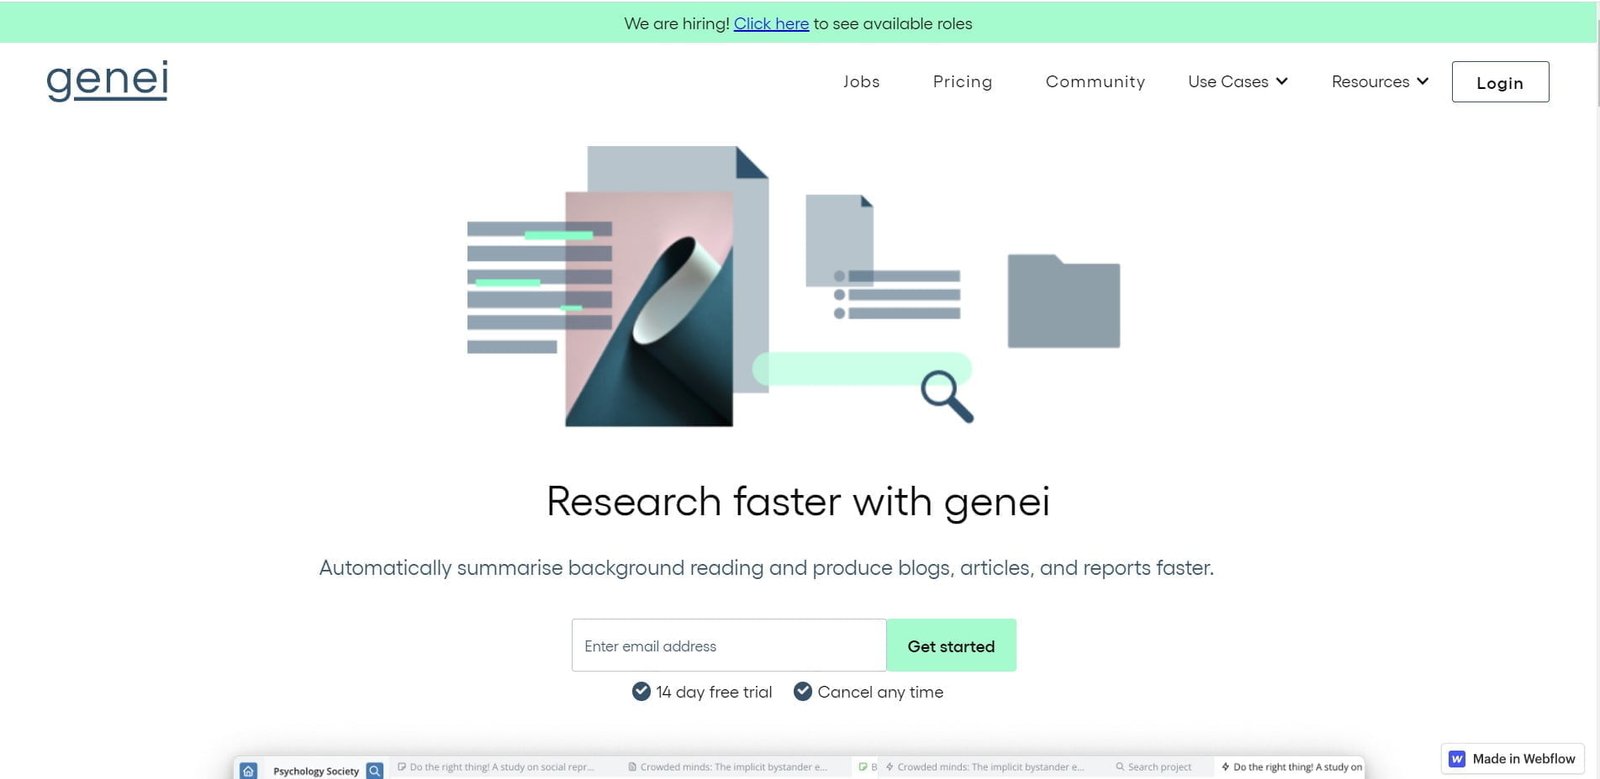 Genei is an AI summarizer and research tool that utilizes AI to automatically summarize articles and research papers